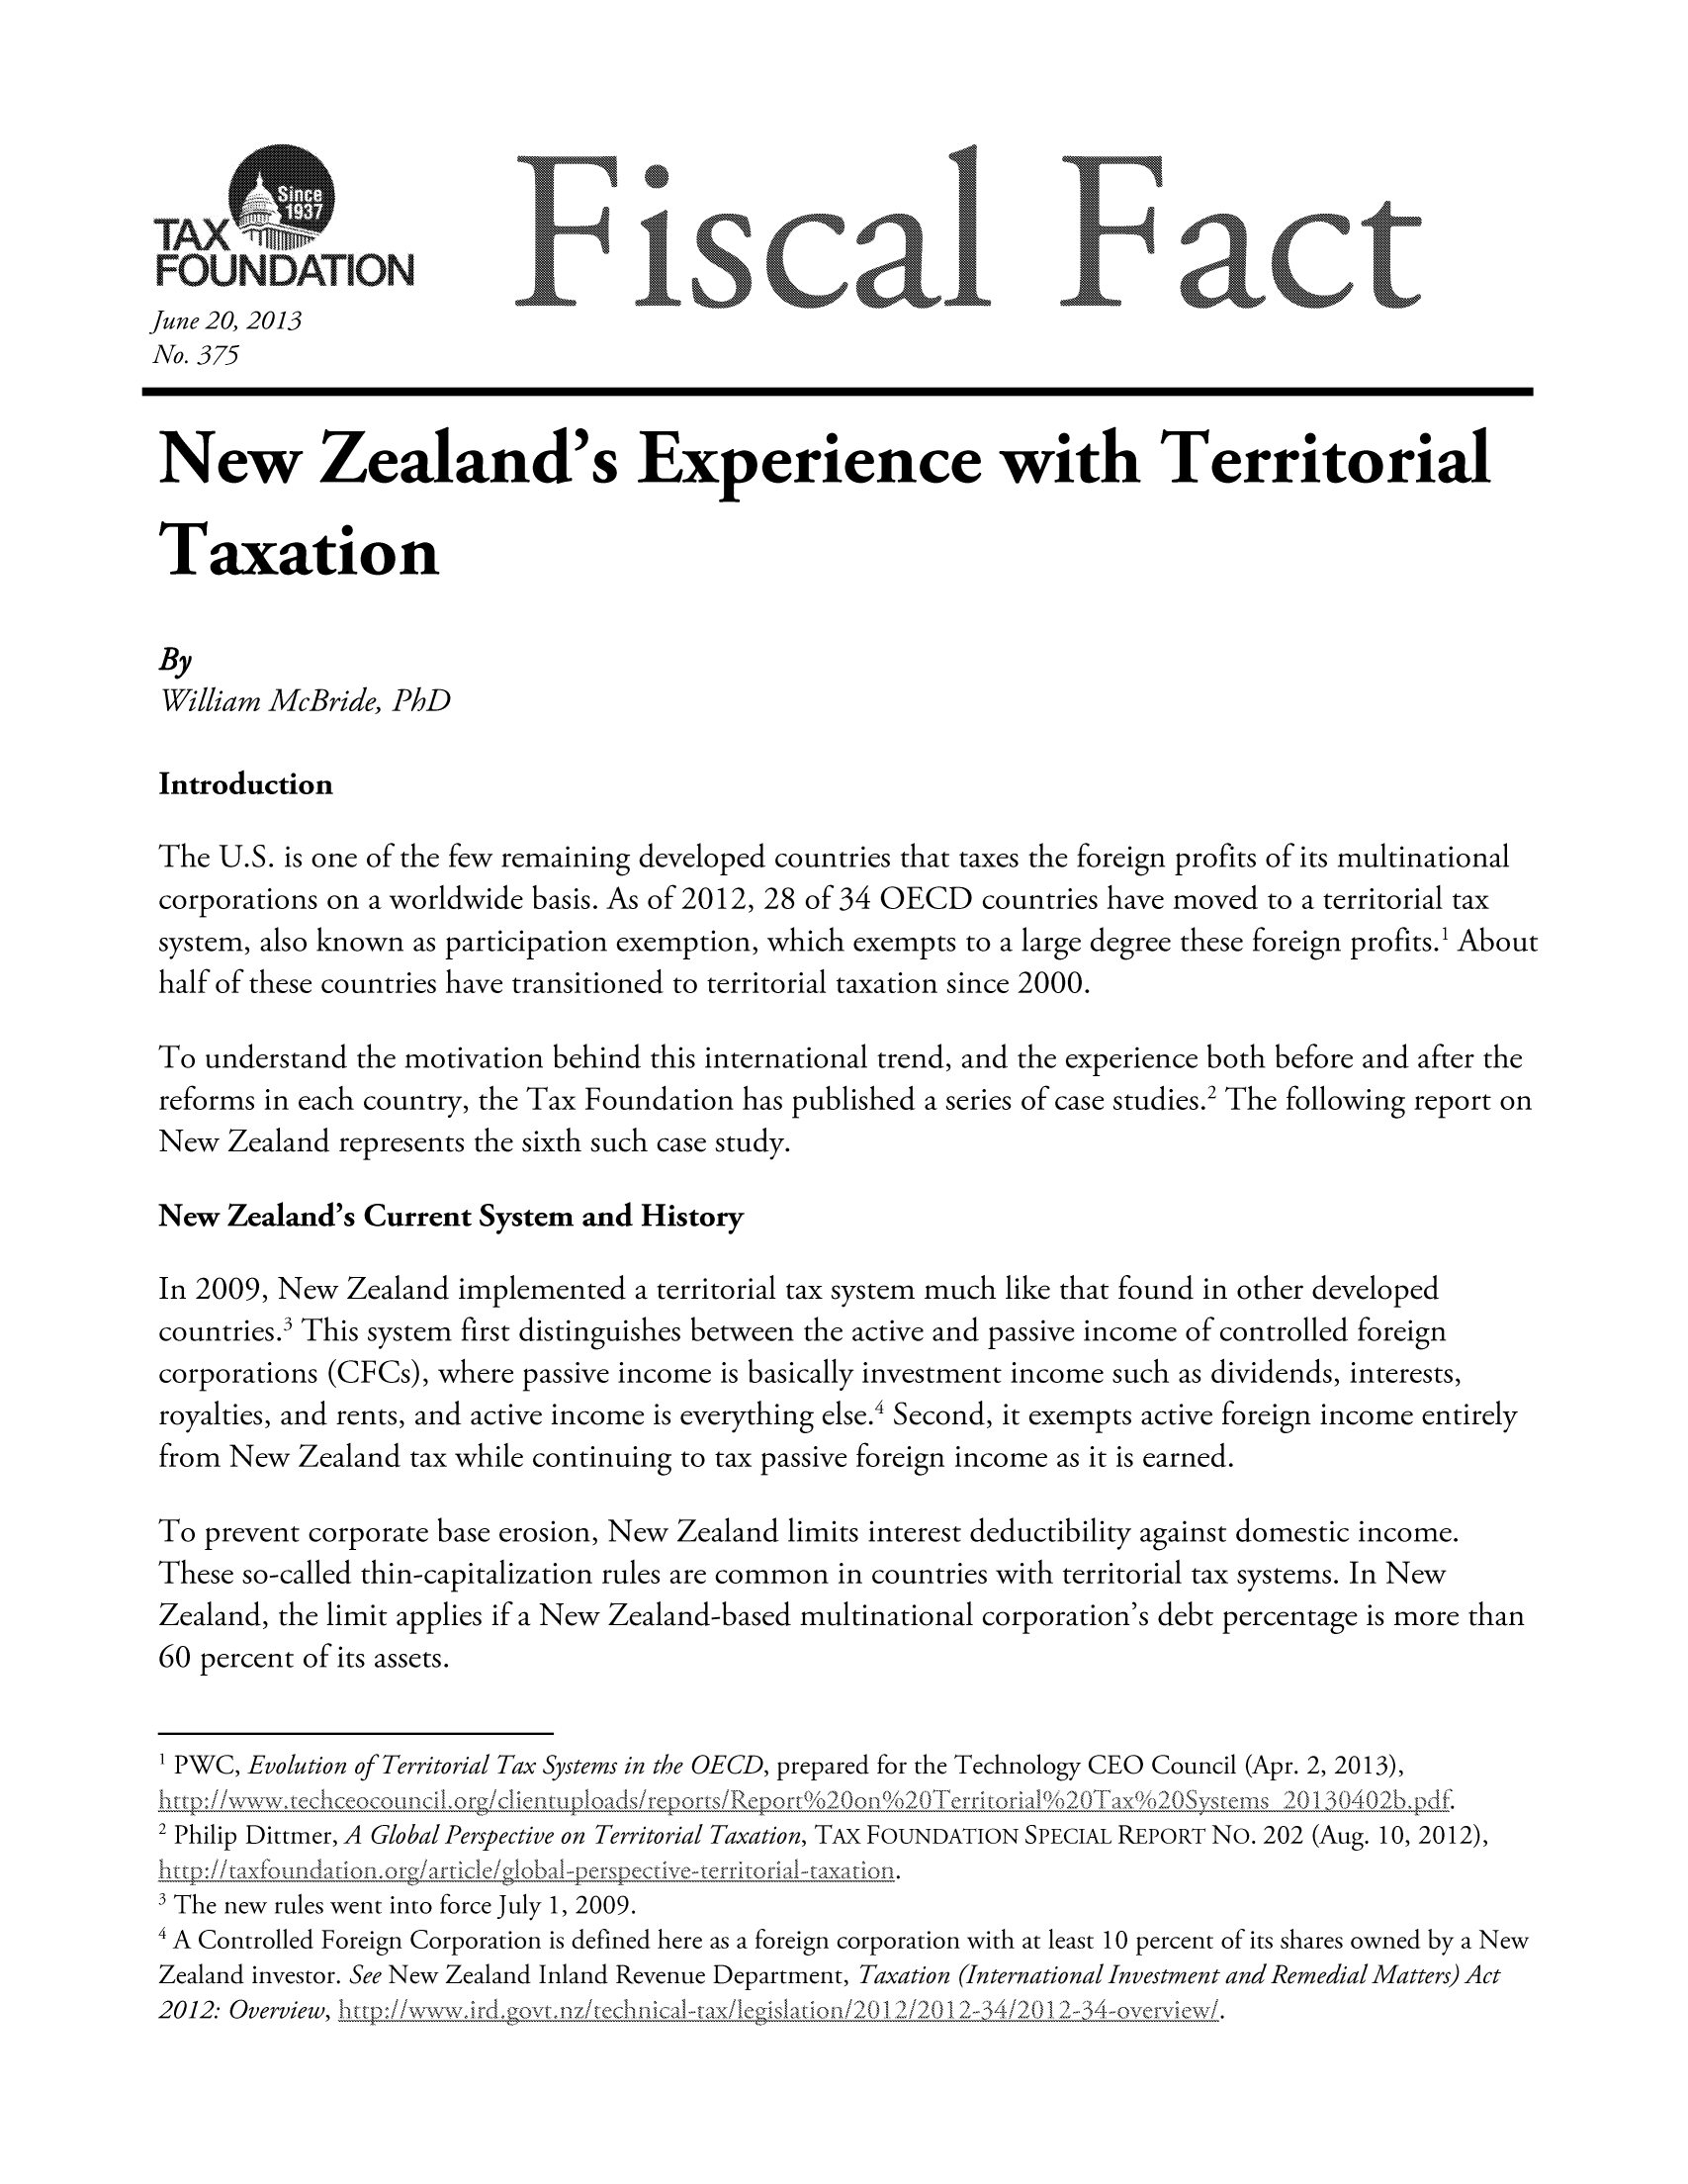 handle is hein.taxfoundation/ffdhfxz0001 and id is 1 raw text is: t u0uOAT, O              ]F          scal ]Fact
June 20, 2013
No. 375
New Zealand's Experience with Territorial
Taxation
By
William McBride, PhD
Introduction
The U.S. is one of the few remaining developed countries that taxes the foreign profits of its multinational
corporations on a worldwide basis. As of 2012, 28 of 34 OECD countries have moved to a territorial tax
system, also known as participation exemption, which exempts to a large degree these foreign profits.1 About
half of these countries have transitioned to territorial taxation since 2000.
To understand the motivation behind this international trend, and the experience both before and after the
reforms in each country, the Tax Foundation has published a series of case studies.2 The following report on
New Zealand represents the sixth such case study.
New Zealand's Current System and History
In 2009, New Zealand implemented a territorial tax system much like that found in other developed
countries.3 This system first distinguishes between the active and passive income of controlled foreign
corporations (CFCs), where passive income is basically investment income such as dividends, interests,
royalties, and rents, and active income is everything else.4 Second, it exempts active foreign income entirely
from New Zealand tax while continuing to tax passive foreign income as it is earned.
To prevent corporate base erosion, New Zealand limits interest deductibility against domestic income.
These so-called thin-capitalization rules are common in countries with territorial tax systems. In New
Zealand, the limit applies if a New Zealand-based multinational corporation's debt percentage is more than
60 percent of its assets.
1 PWC, Evolution of Territorial Tax Systems in the OECD, prepared for the Technology CEO Council (Apr. 2, 2013),
2 Philip Dittmer, A Global Perspective on Territorial Taxation, TAX FOUNDATION SPECIAL REPORT NO. 202 (Aug. 10, 2012),
SThe new rules went into force July 1, 2009.
4 A Controlled Foreign Corporation is defined here as a foreign corporation with at least 10 percent of its shares owned by a New

Zealand investor. See New Zealand Inland Revenue Department, Taxation (International Investment and Remedial Matters) Act
2012: Overview,    /2012-34-overview/.


